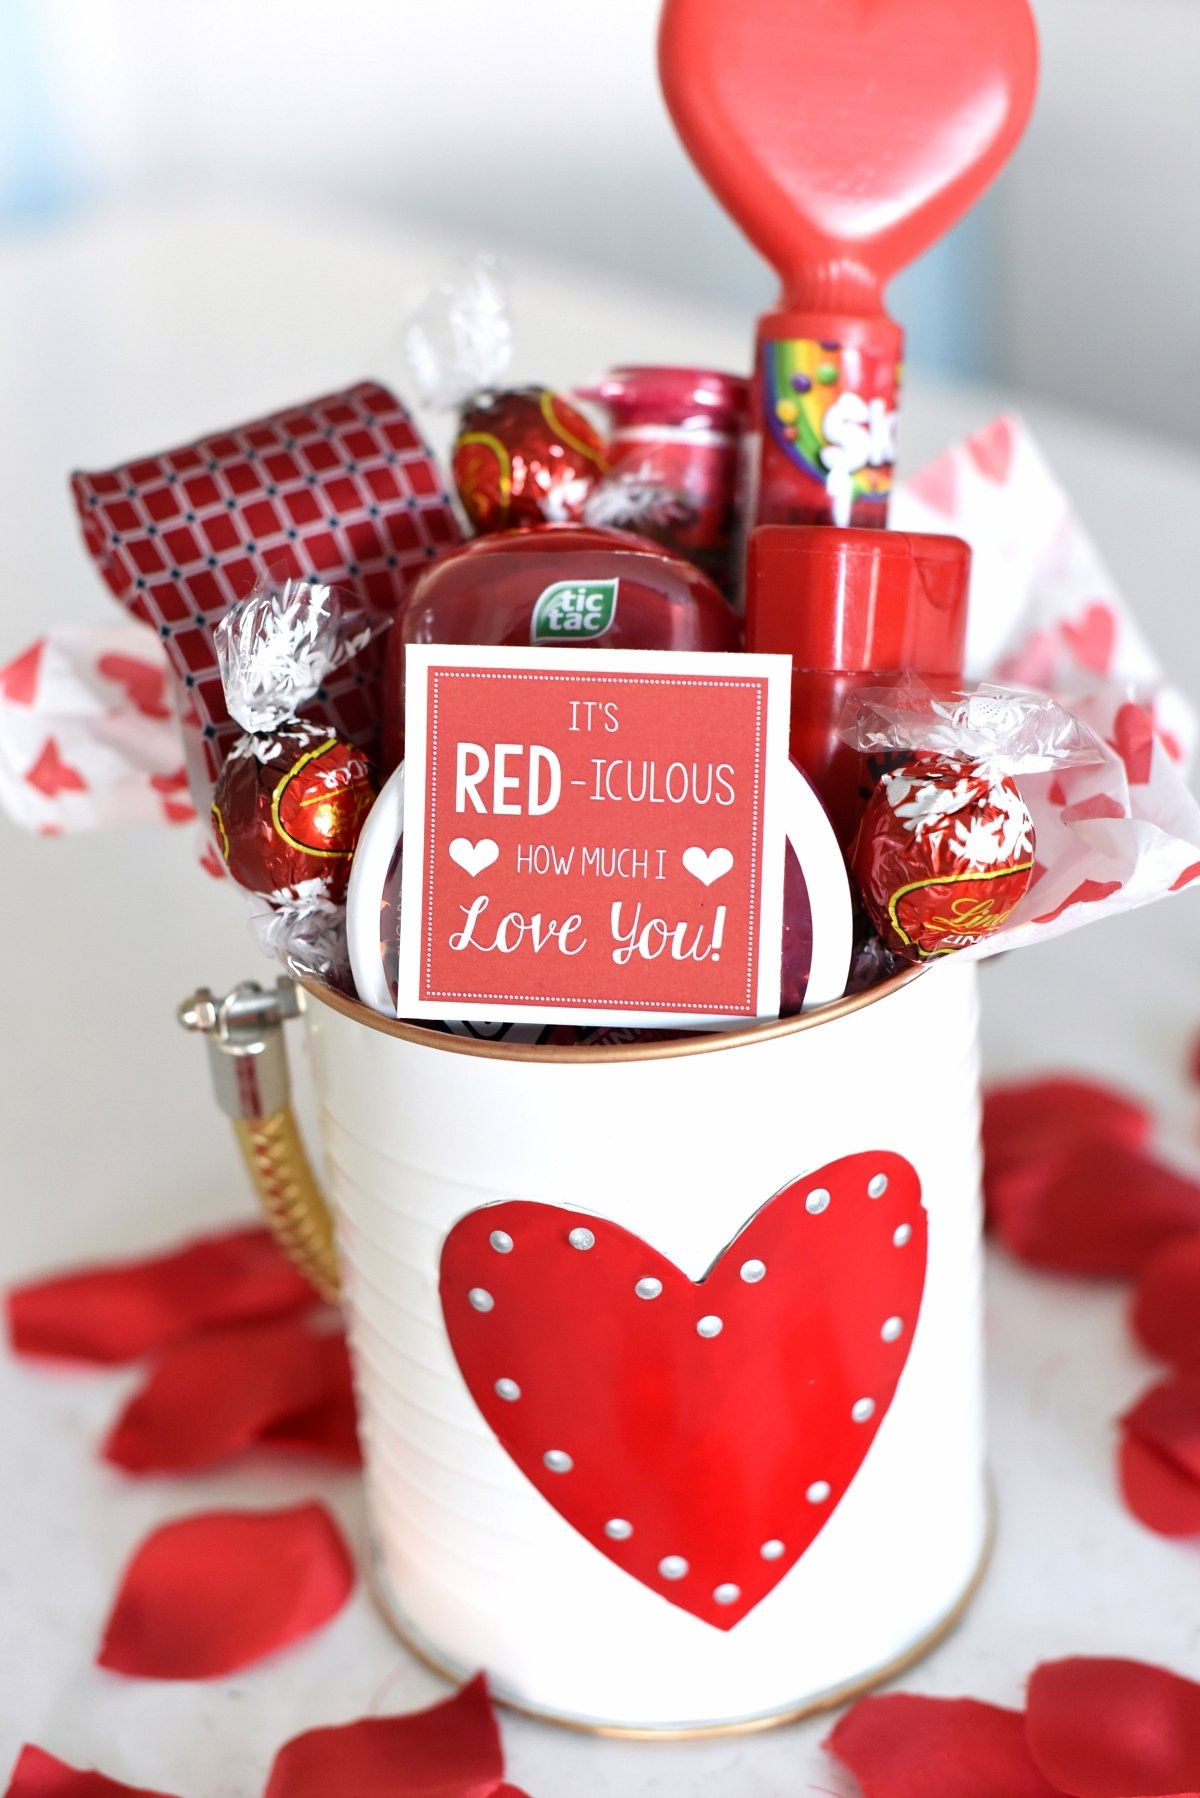 Valentines Day Gift Ideas for Wife Awesome 10 Elegant Valentines Day Gift Ideas for Wife 2020